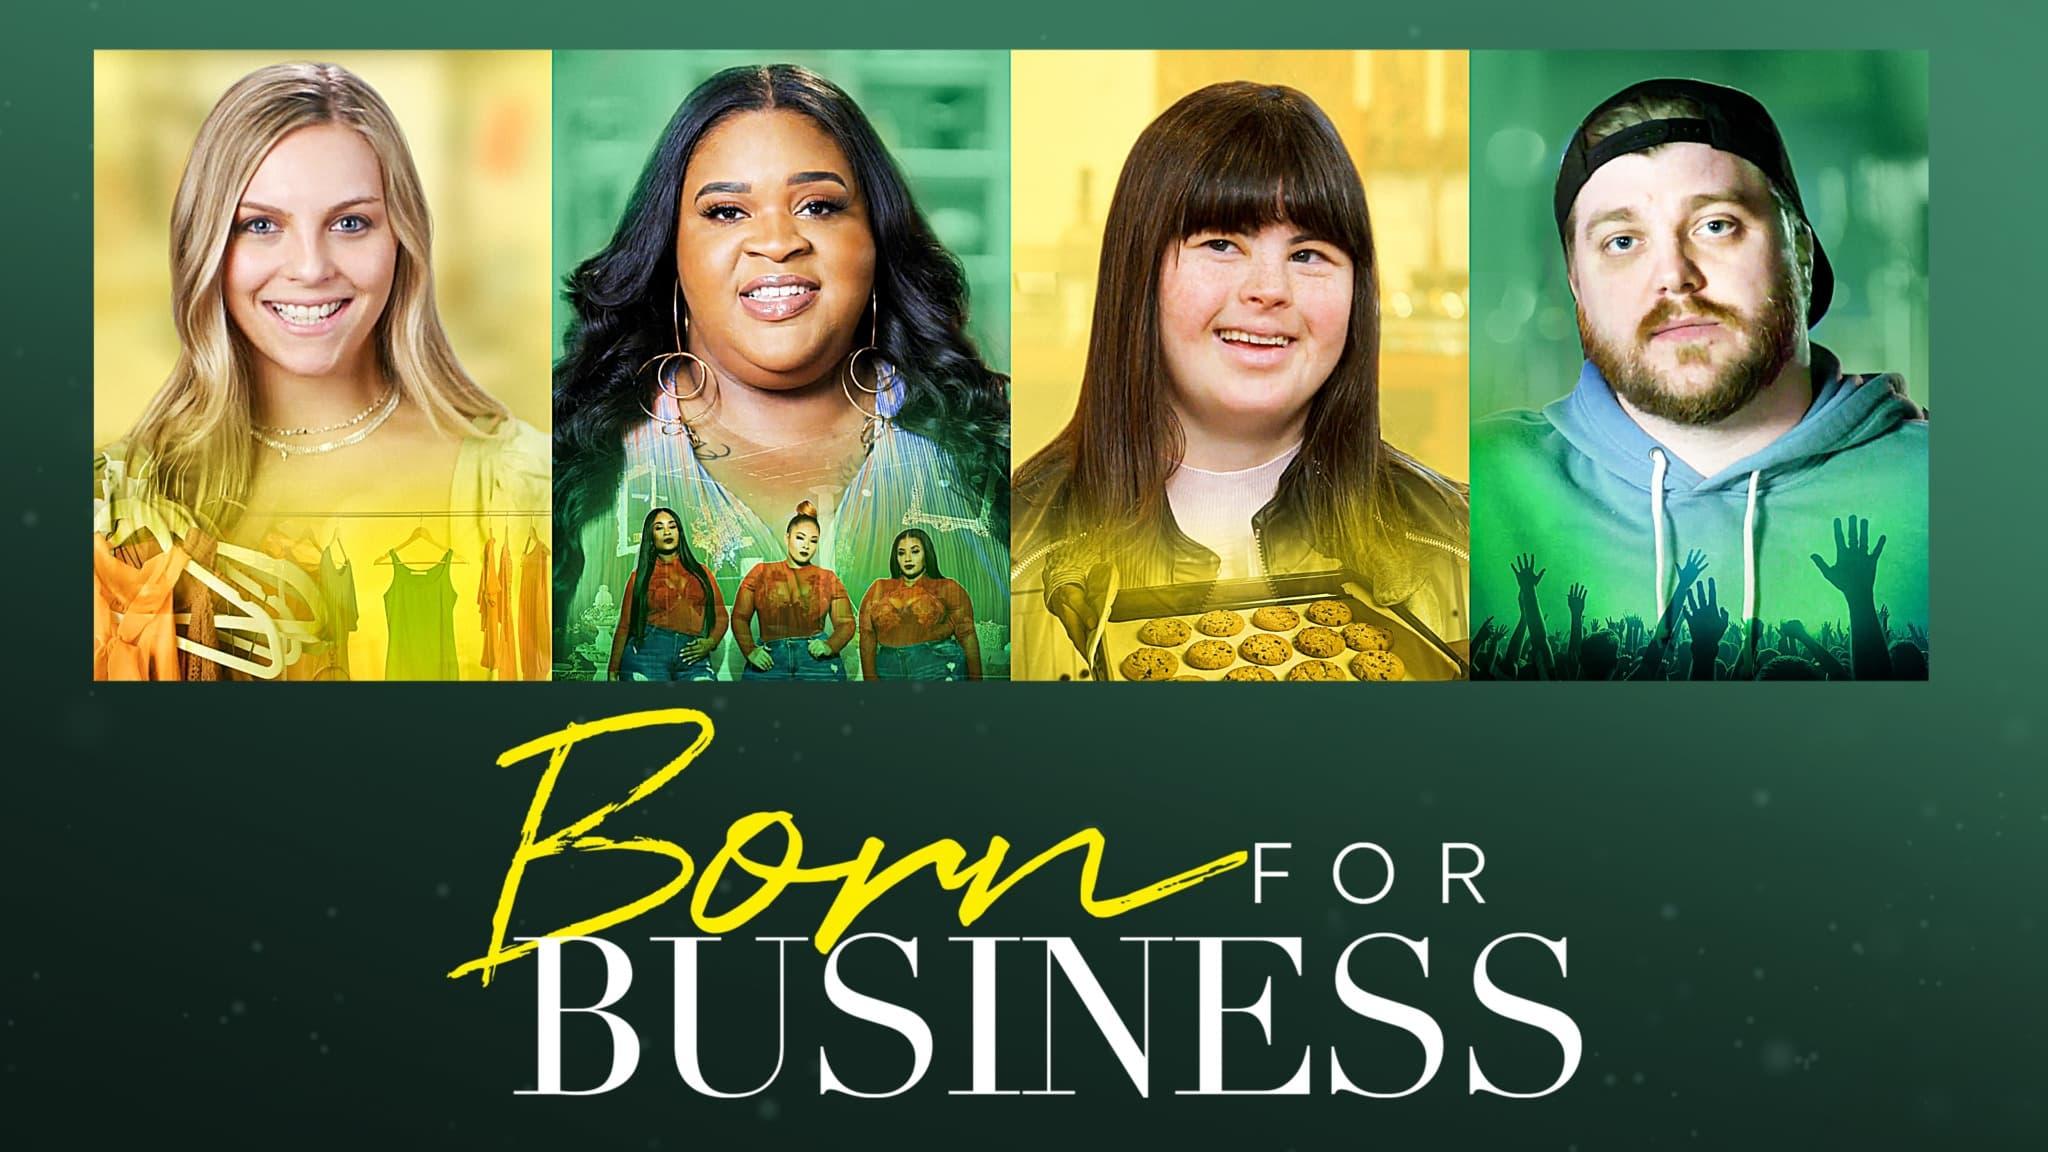 Born for Business backdrop